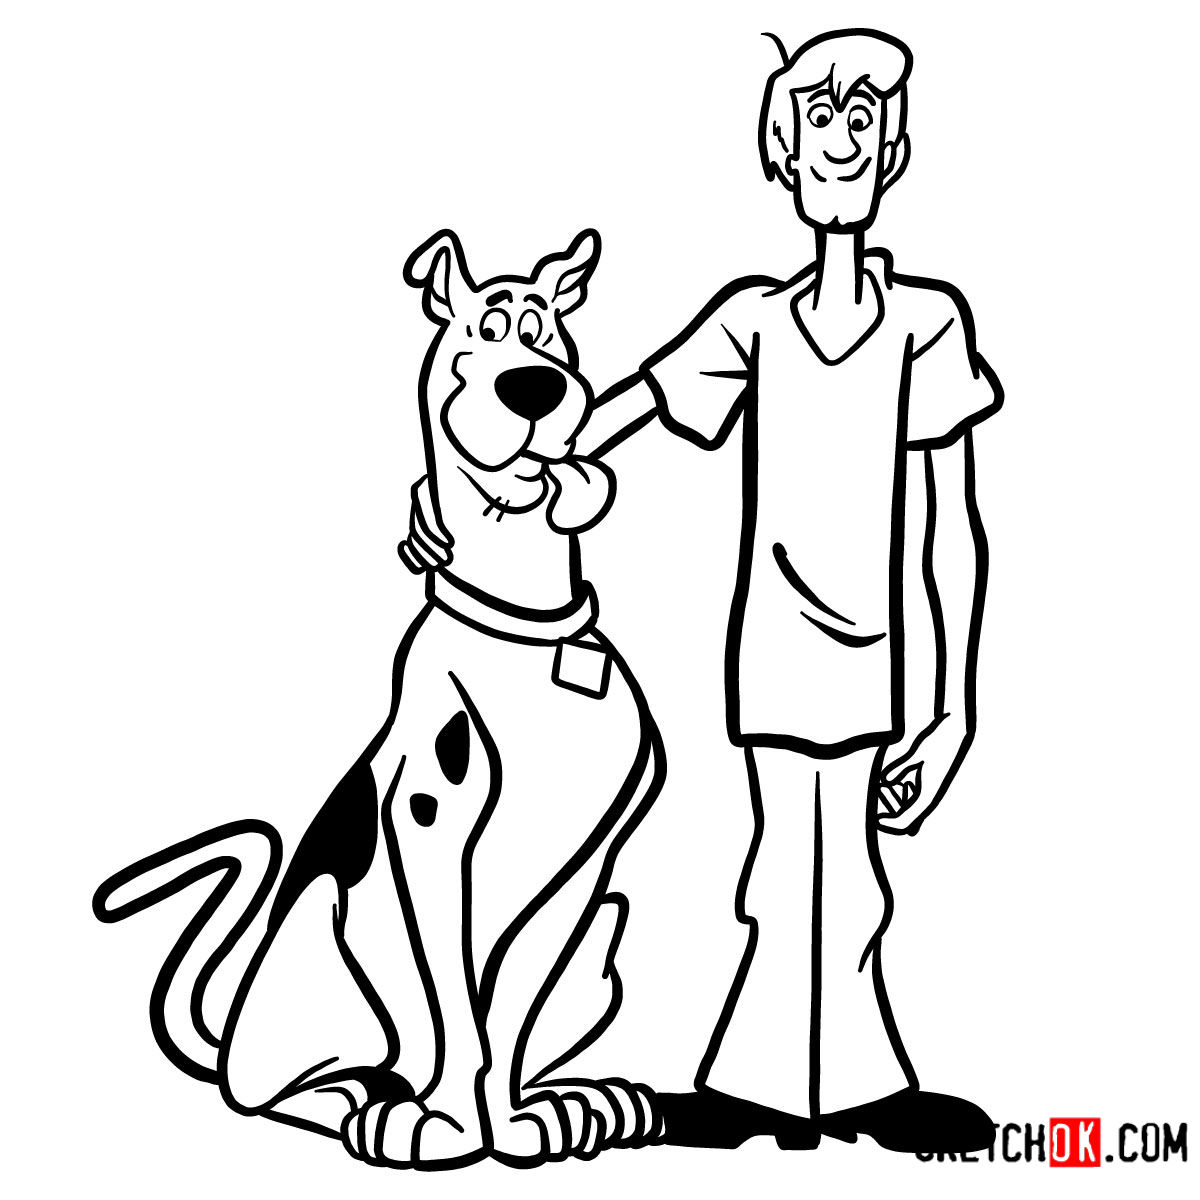 How to draw scooby doo characters